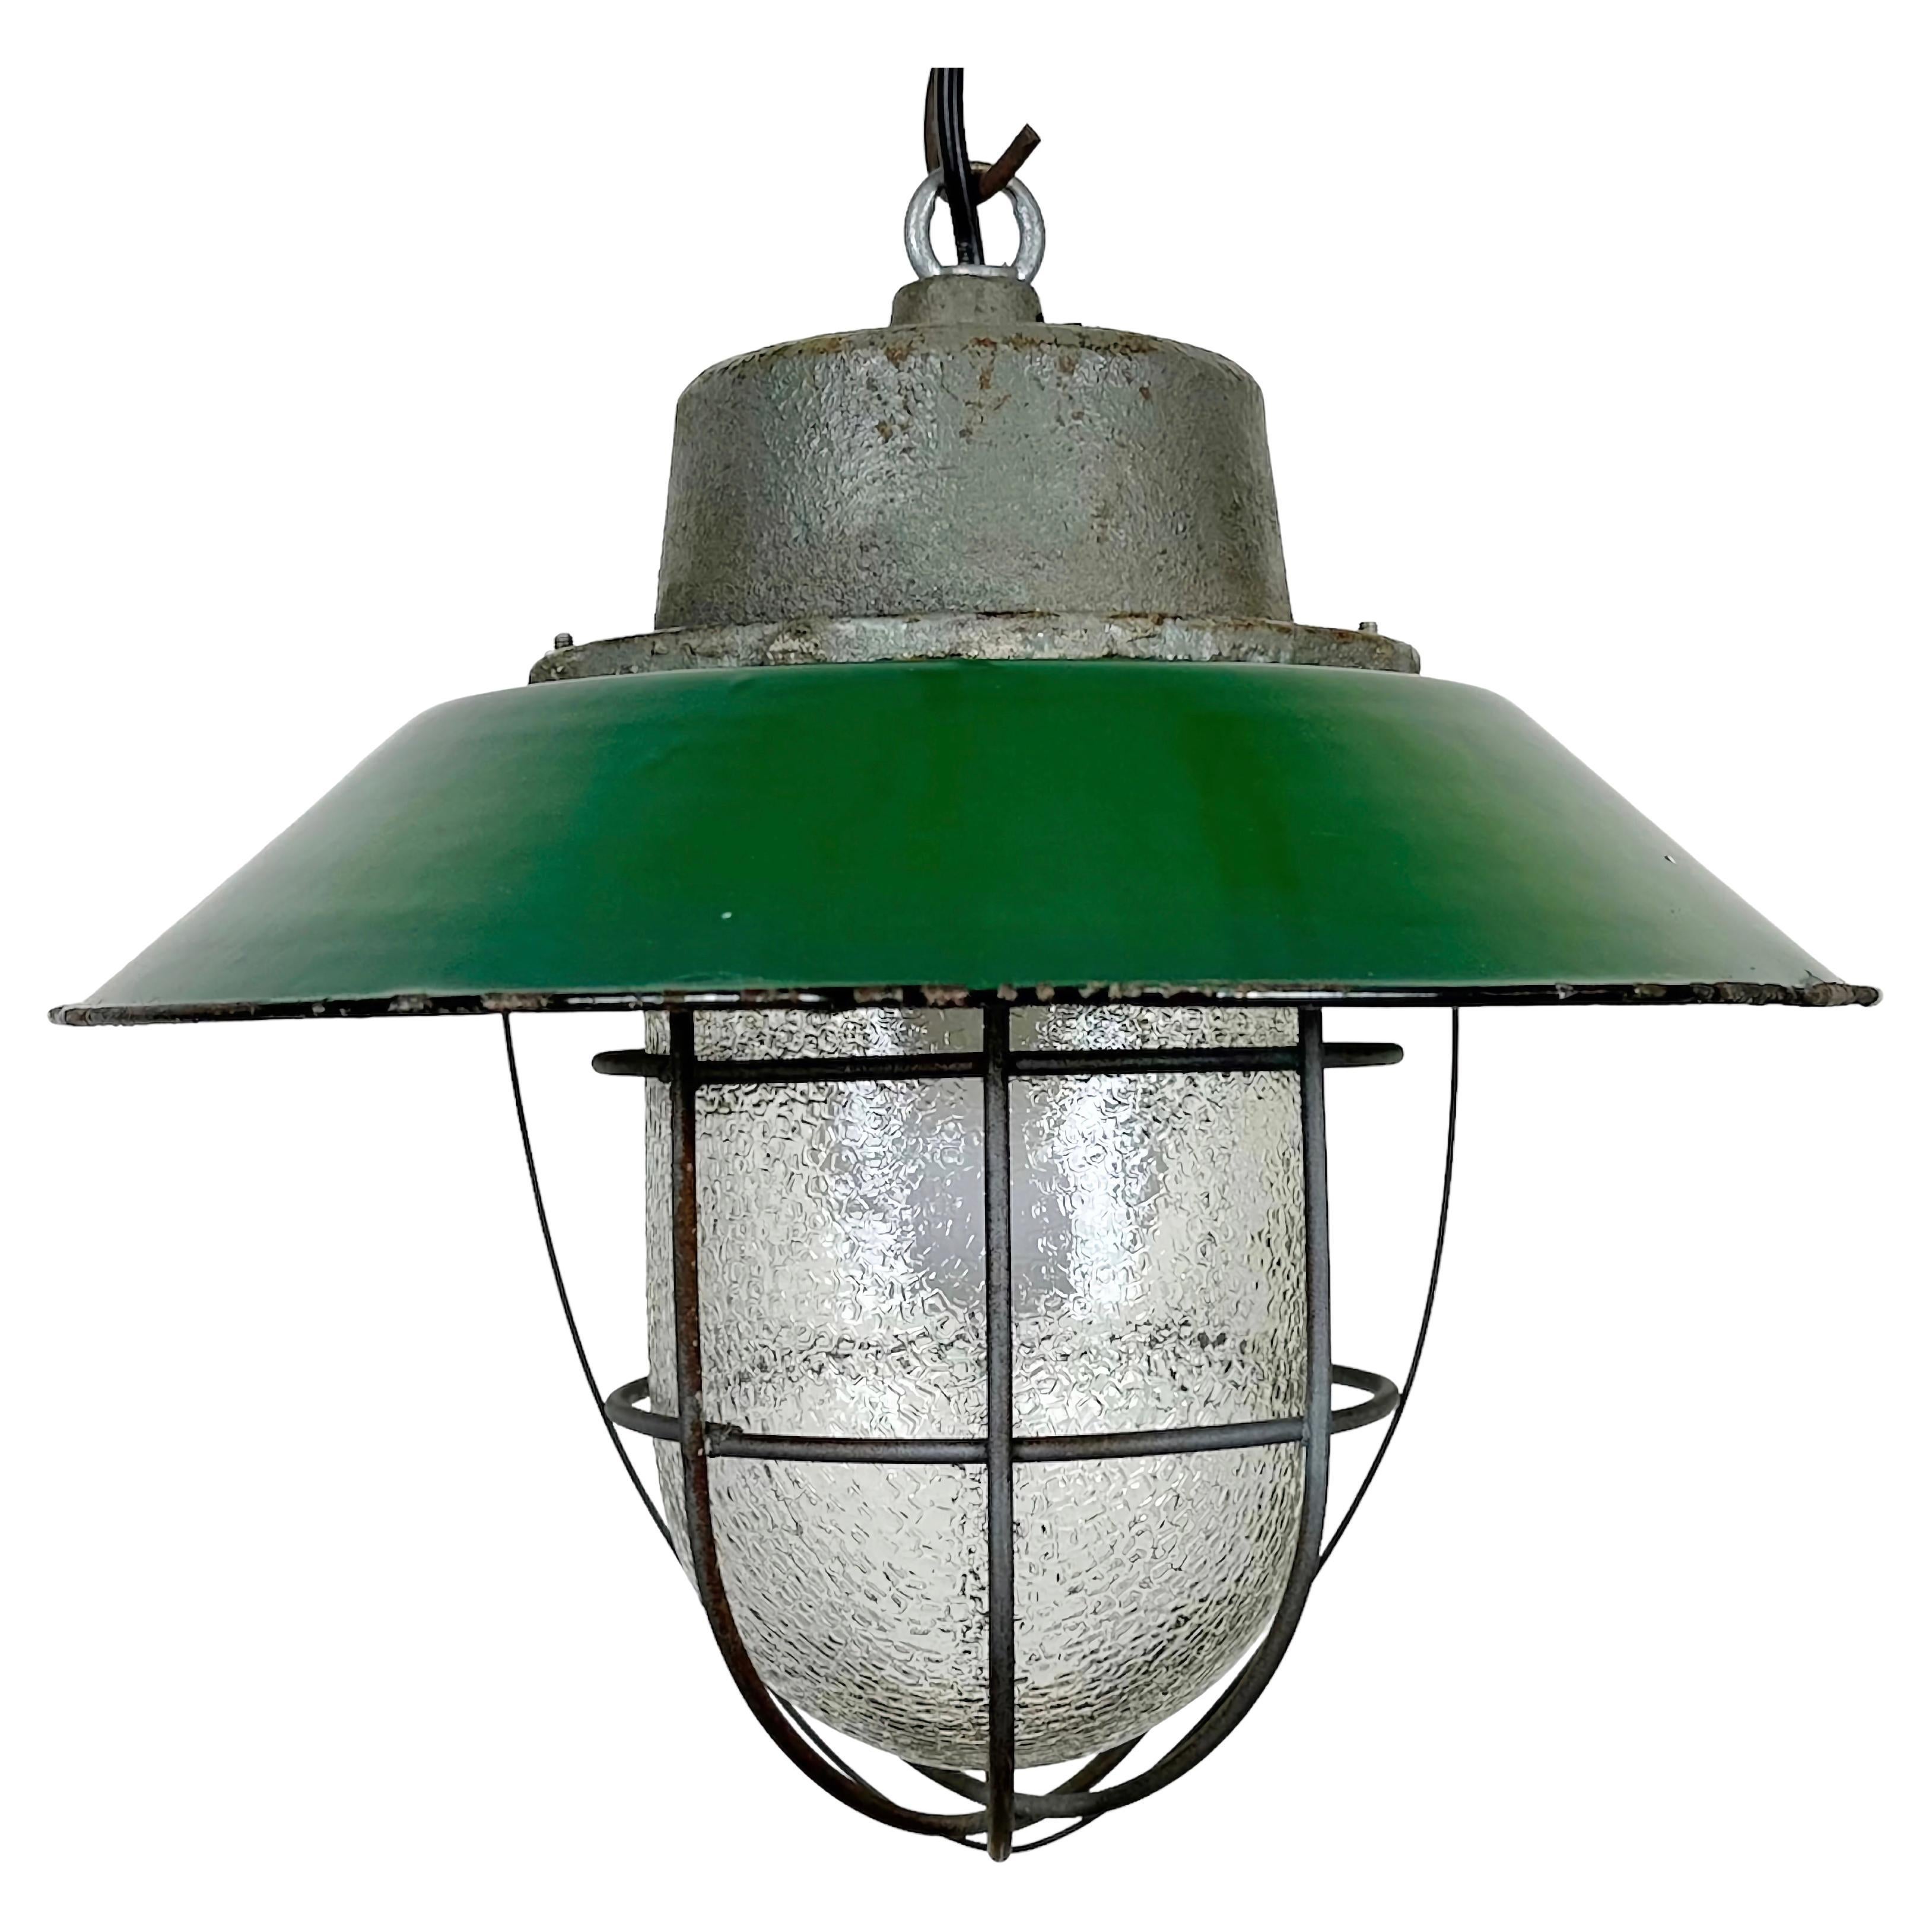 Green Enamel and Cast Iron Industrial Cage Pendant Light, 1960s For Sale